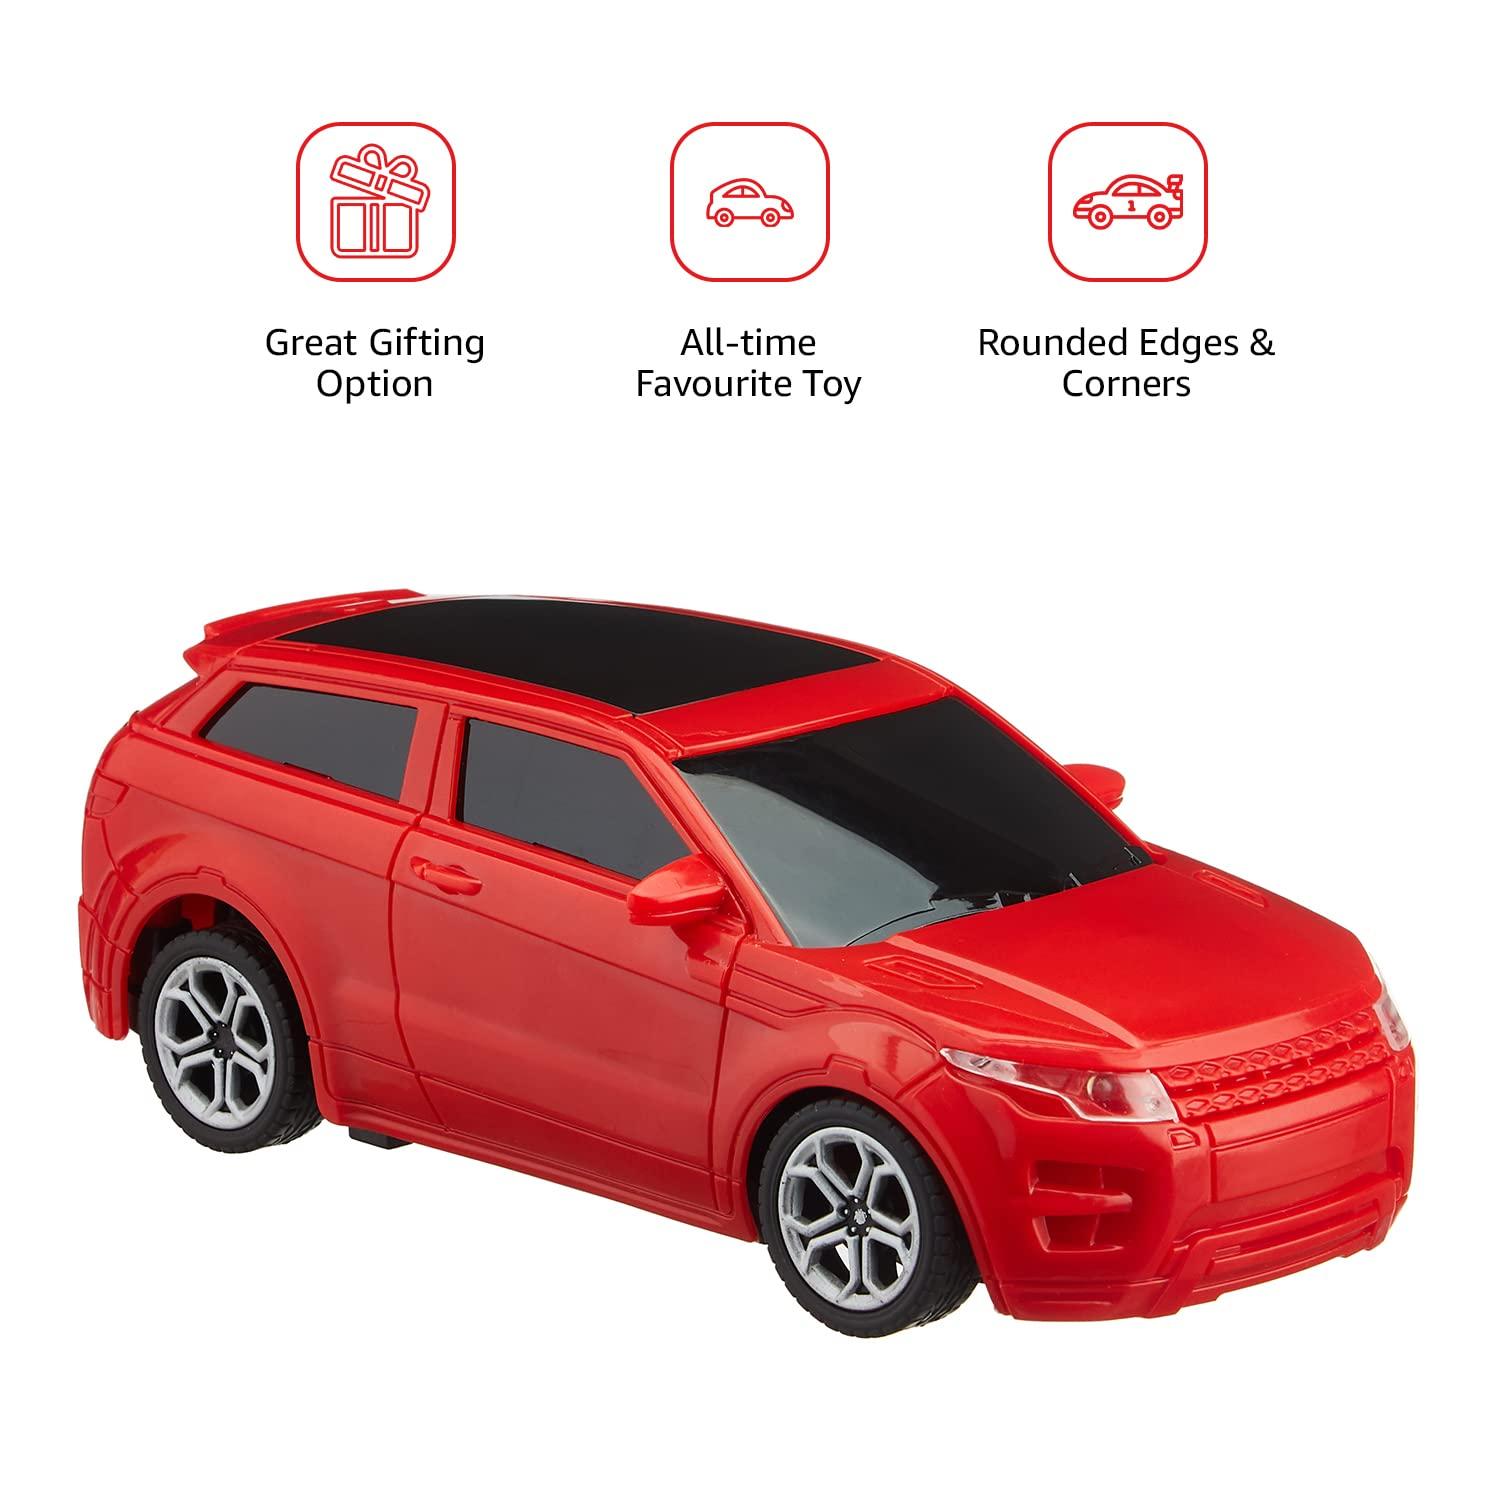 Red Remote Control Car: Owning a red remote control car: advantages, drawbacks, and tips for maximizing the experience.